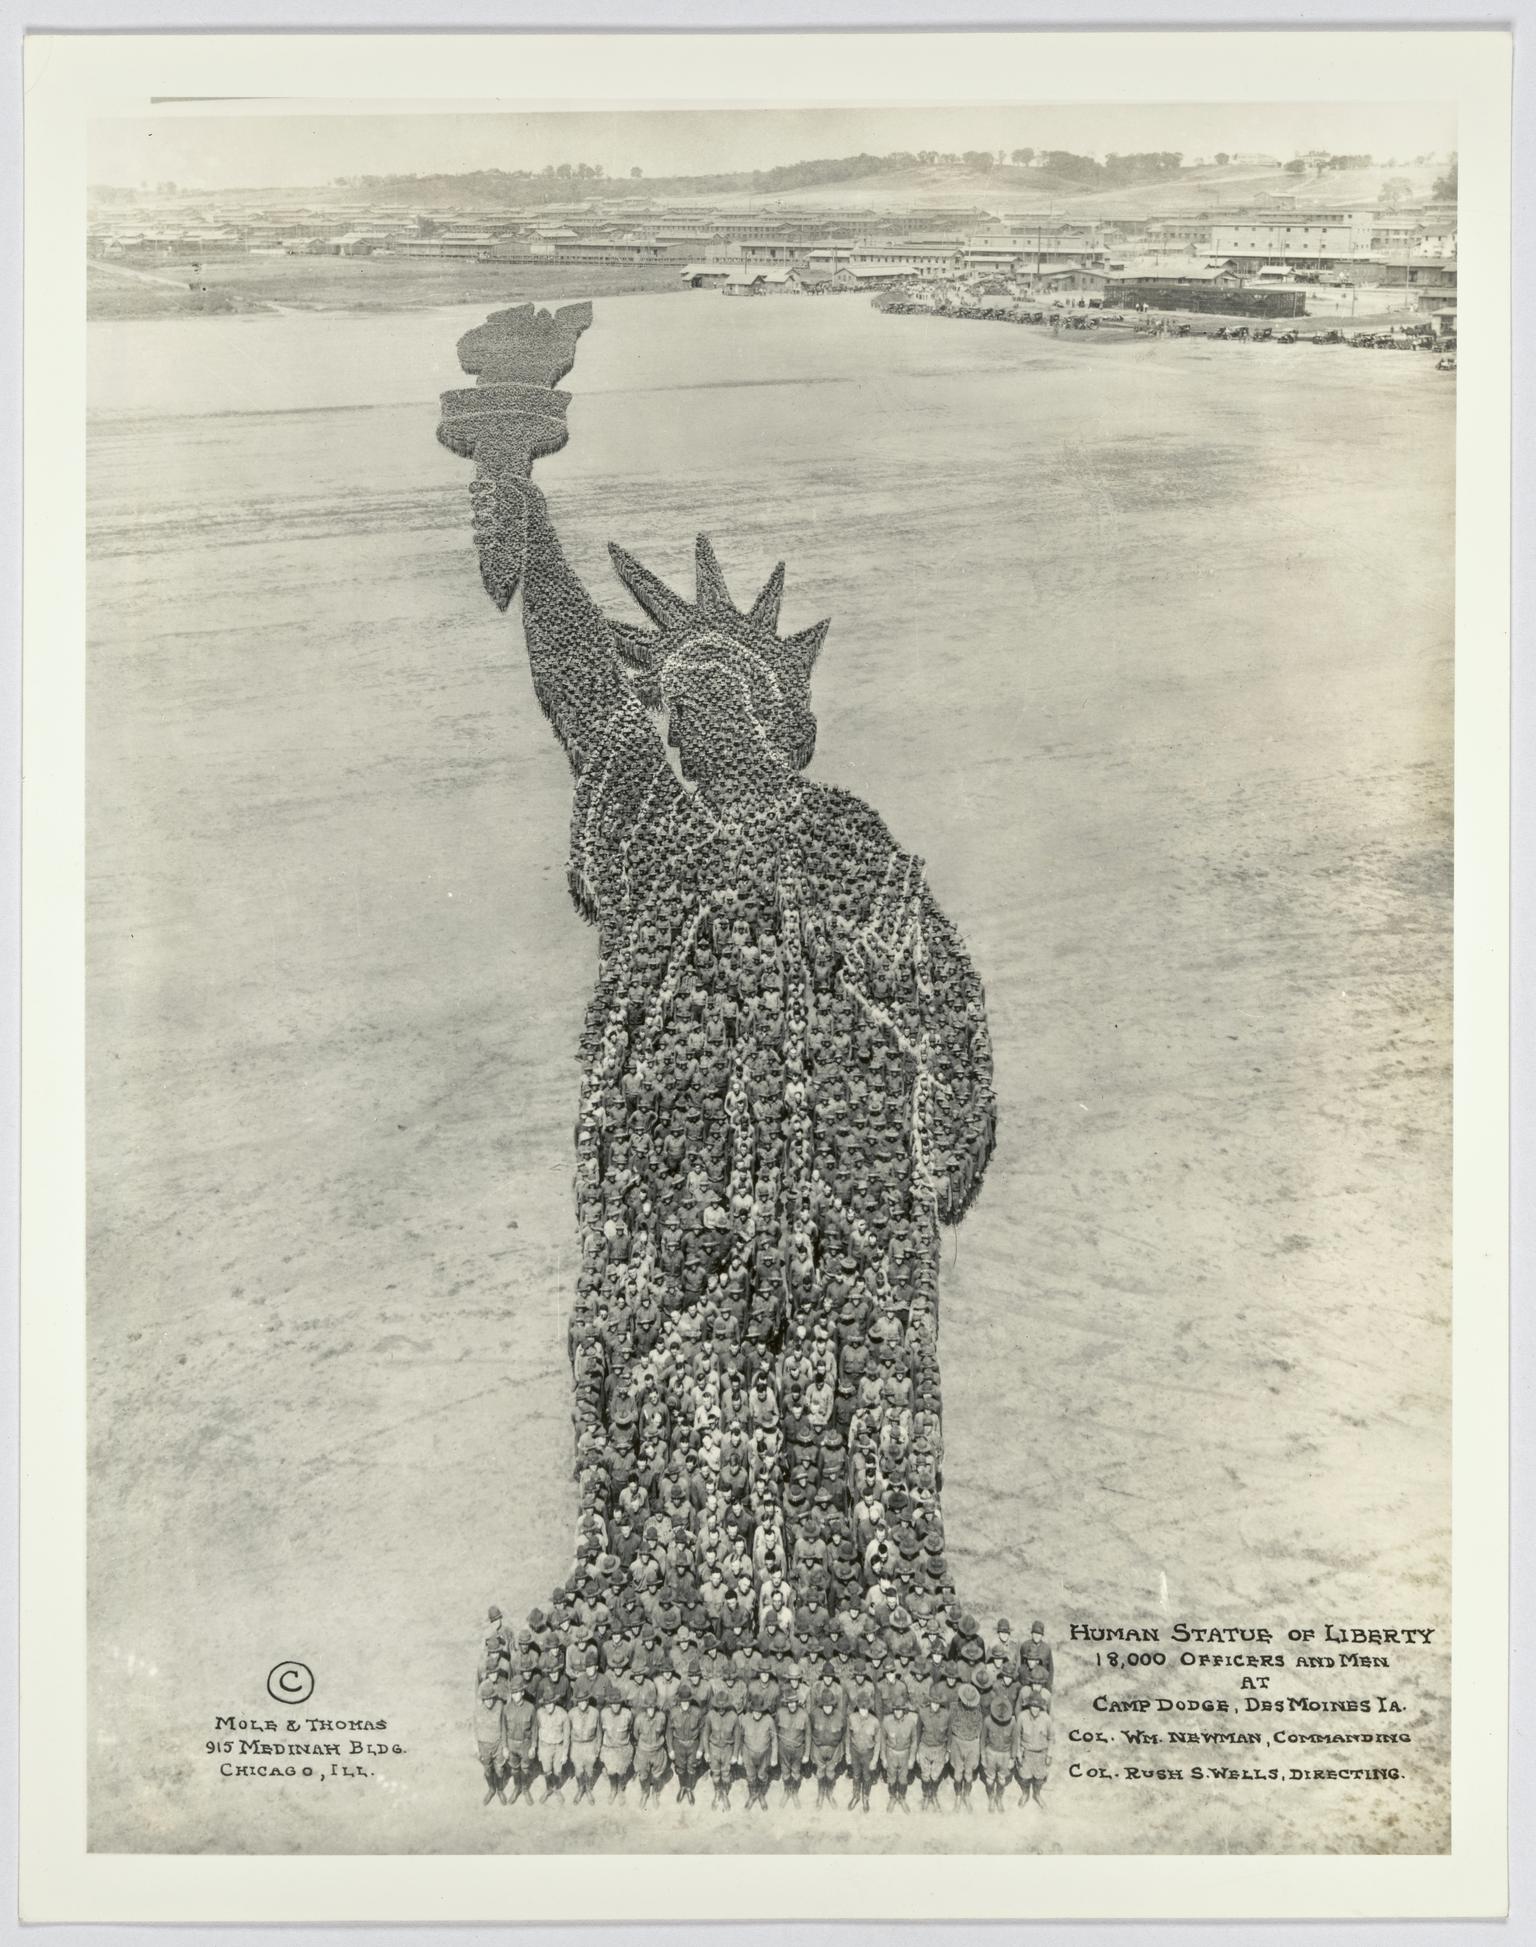 Human Statue of Liberty, 18,000 officers and men at Camp Dodge, Des Moines, IA. Col Wm Newman commanding Col Rush S.Wells directing.